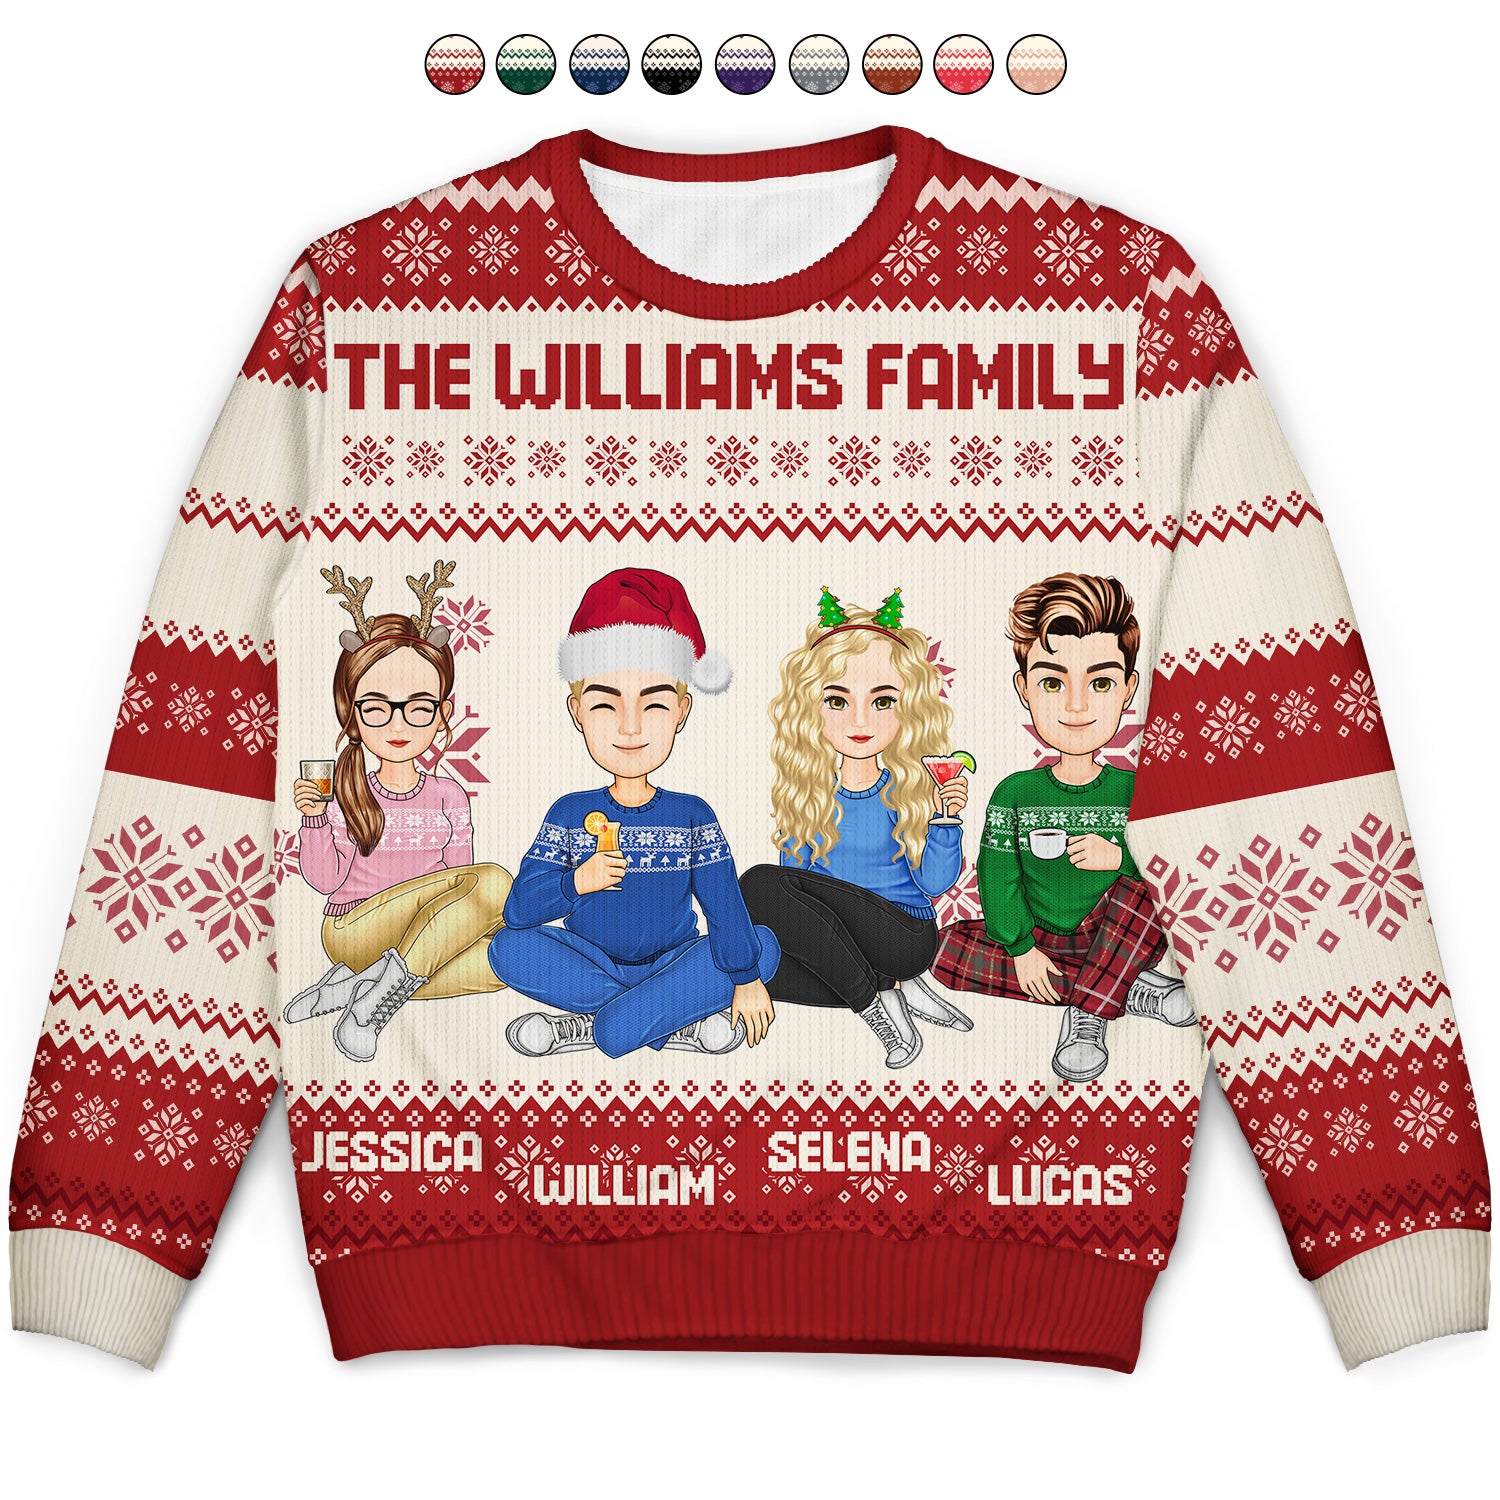 Cartoon Style - Christmas Gift For Family, Friends - Personalized Unisex Ugly Sweater